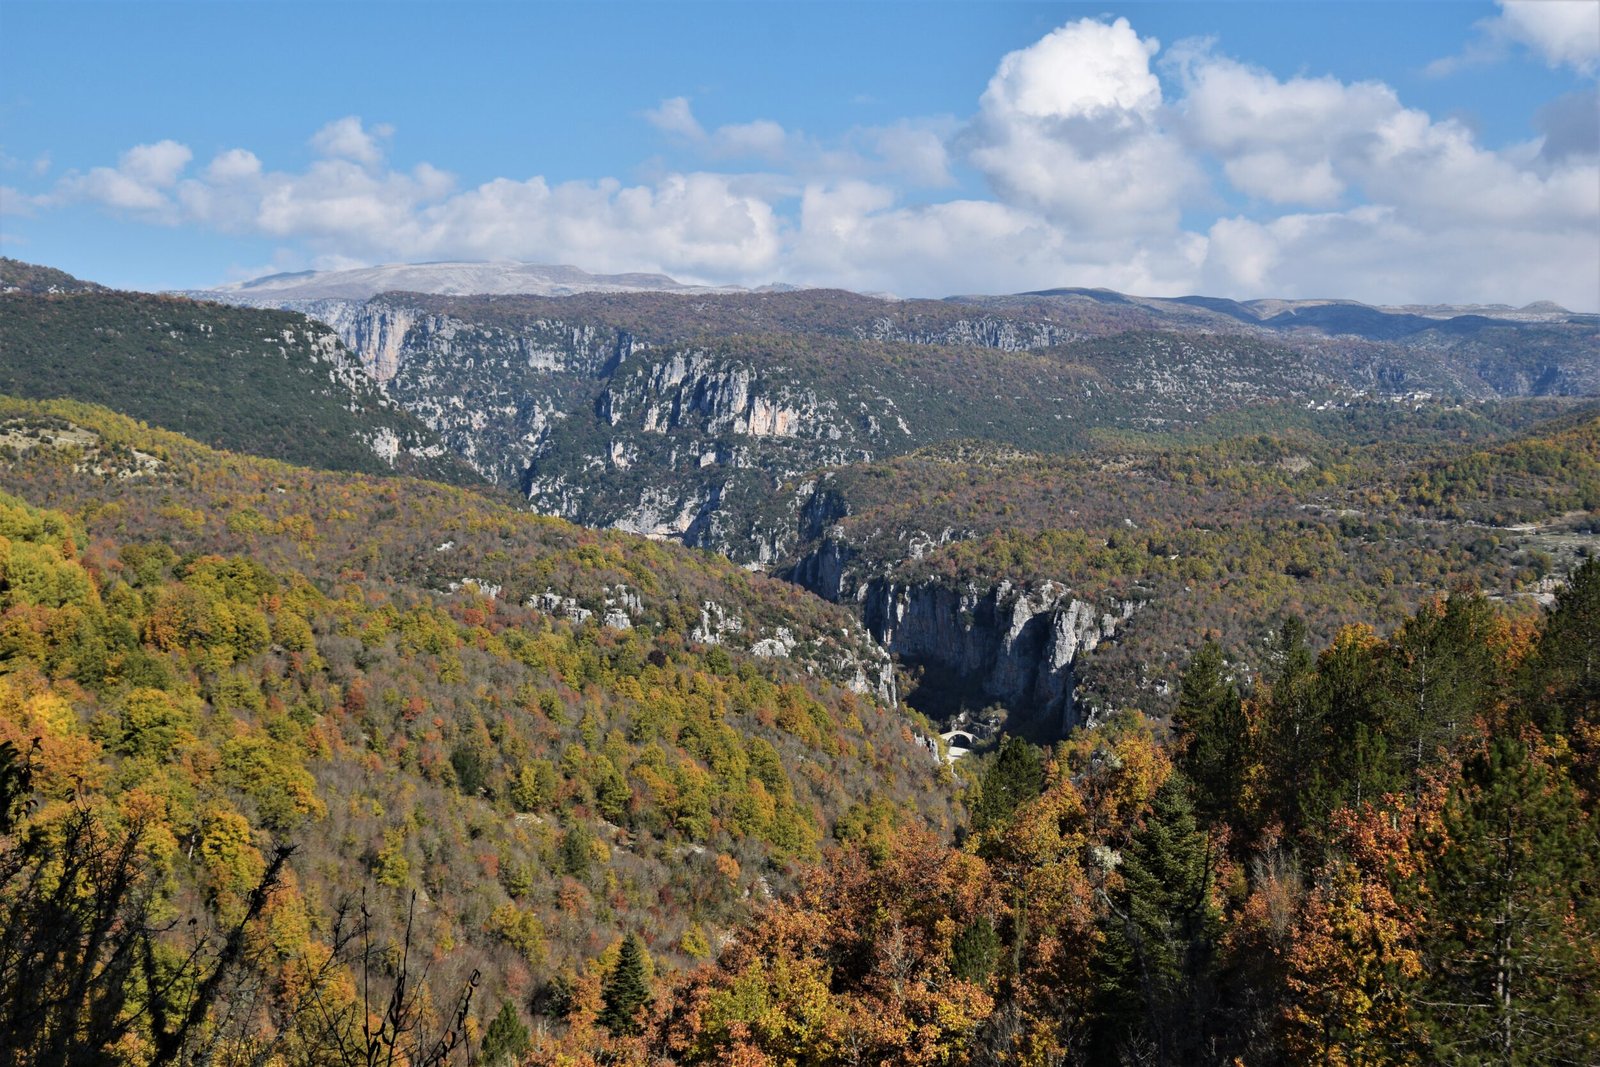 a deep gorge cuts through the forested hills and plateaus of a mountain range in autumn